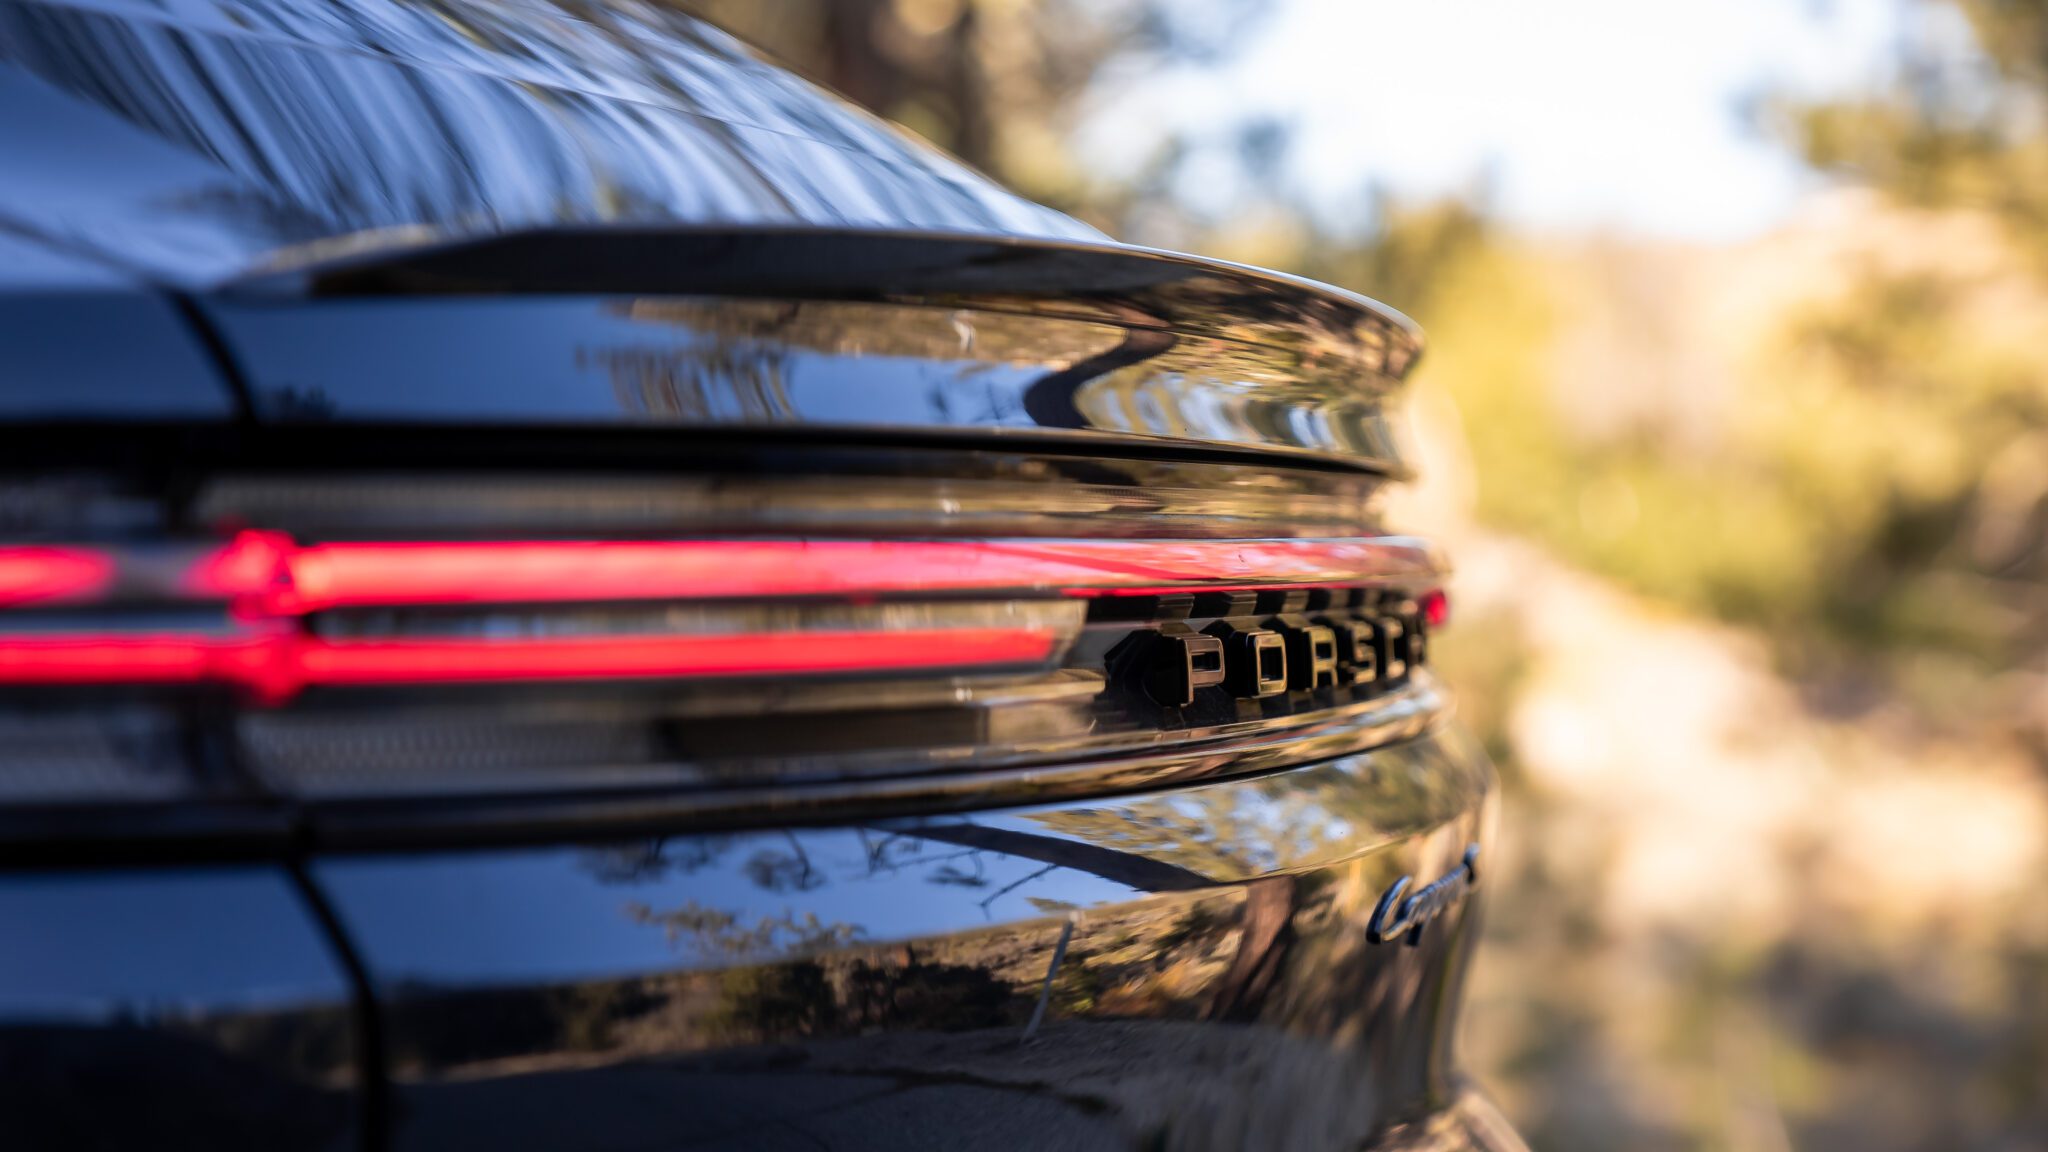 A close up shot of an SUV's taillights.